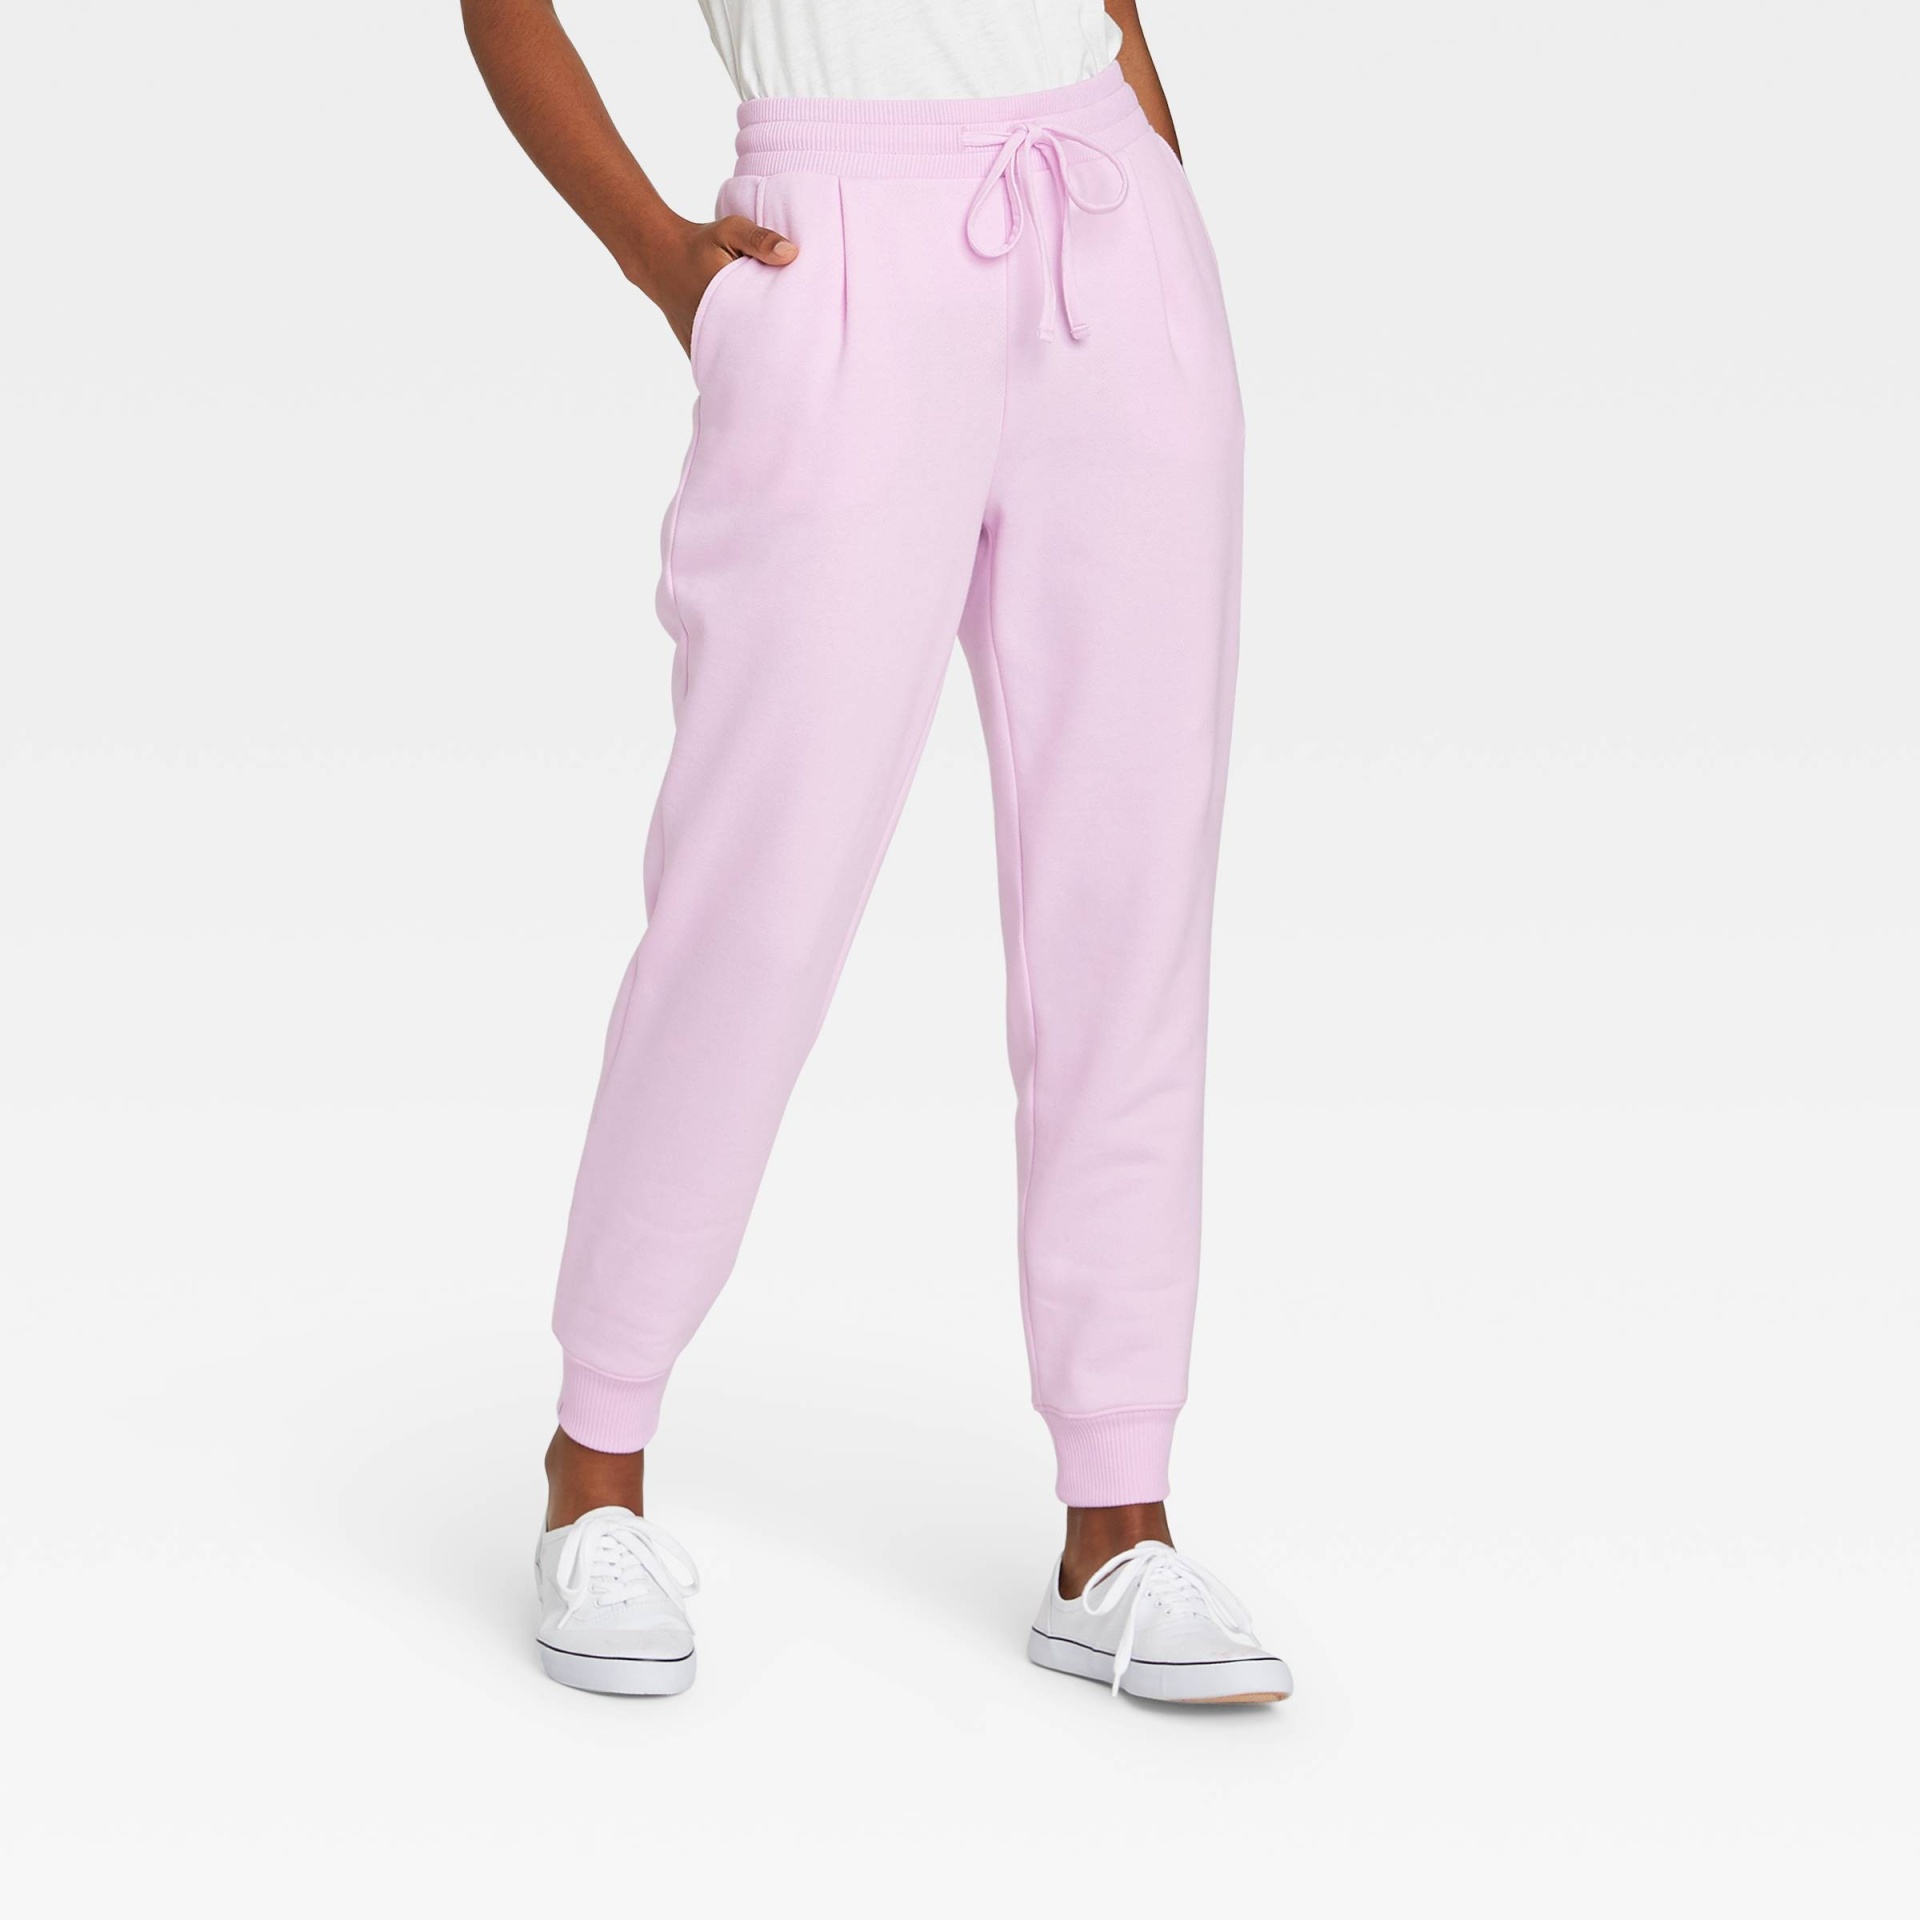 Women's High-Rise Ankle Jogger Pants - A New Day Light Pink XL 1 ct